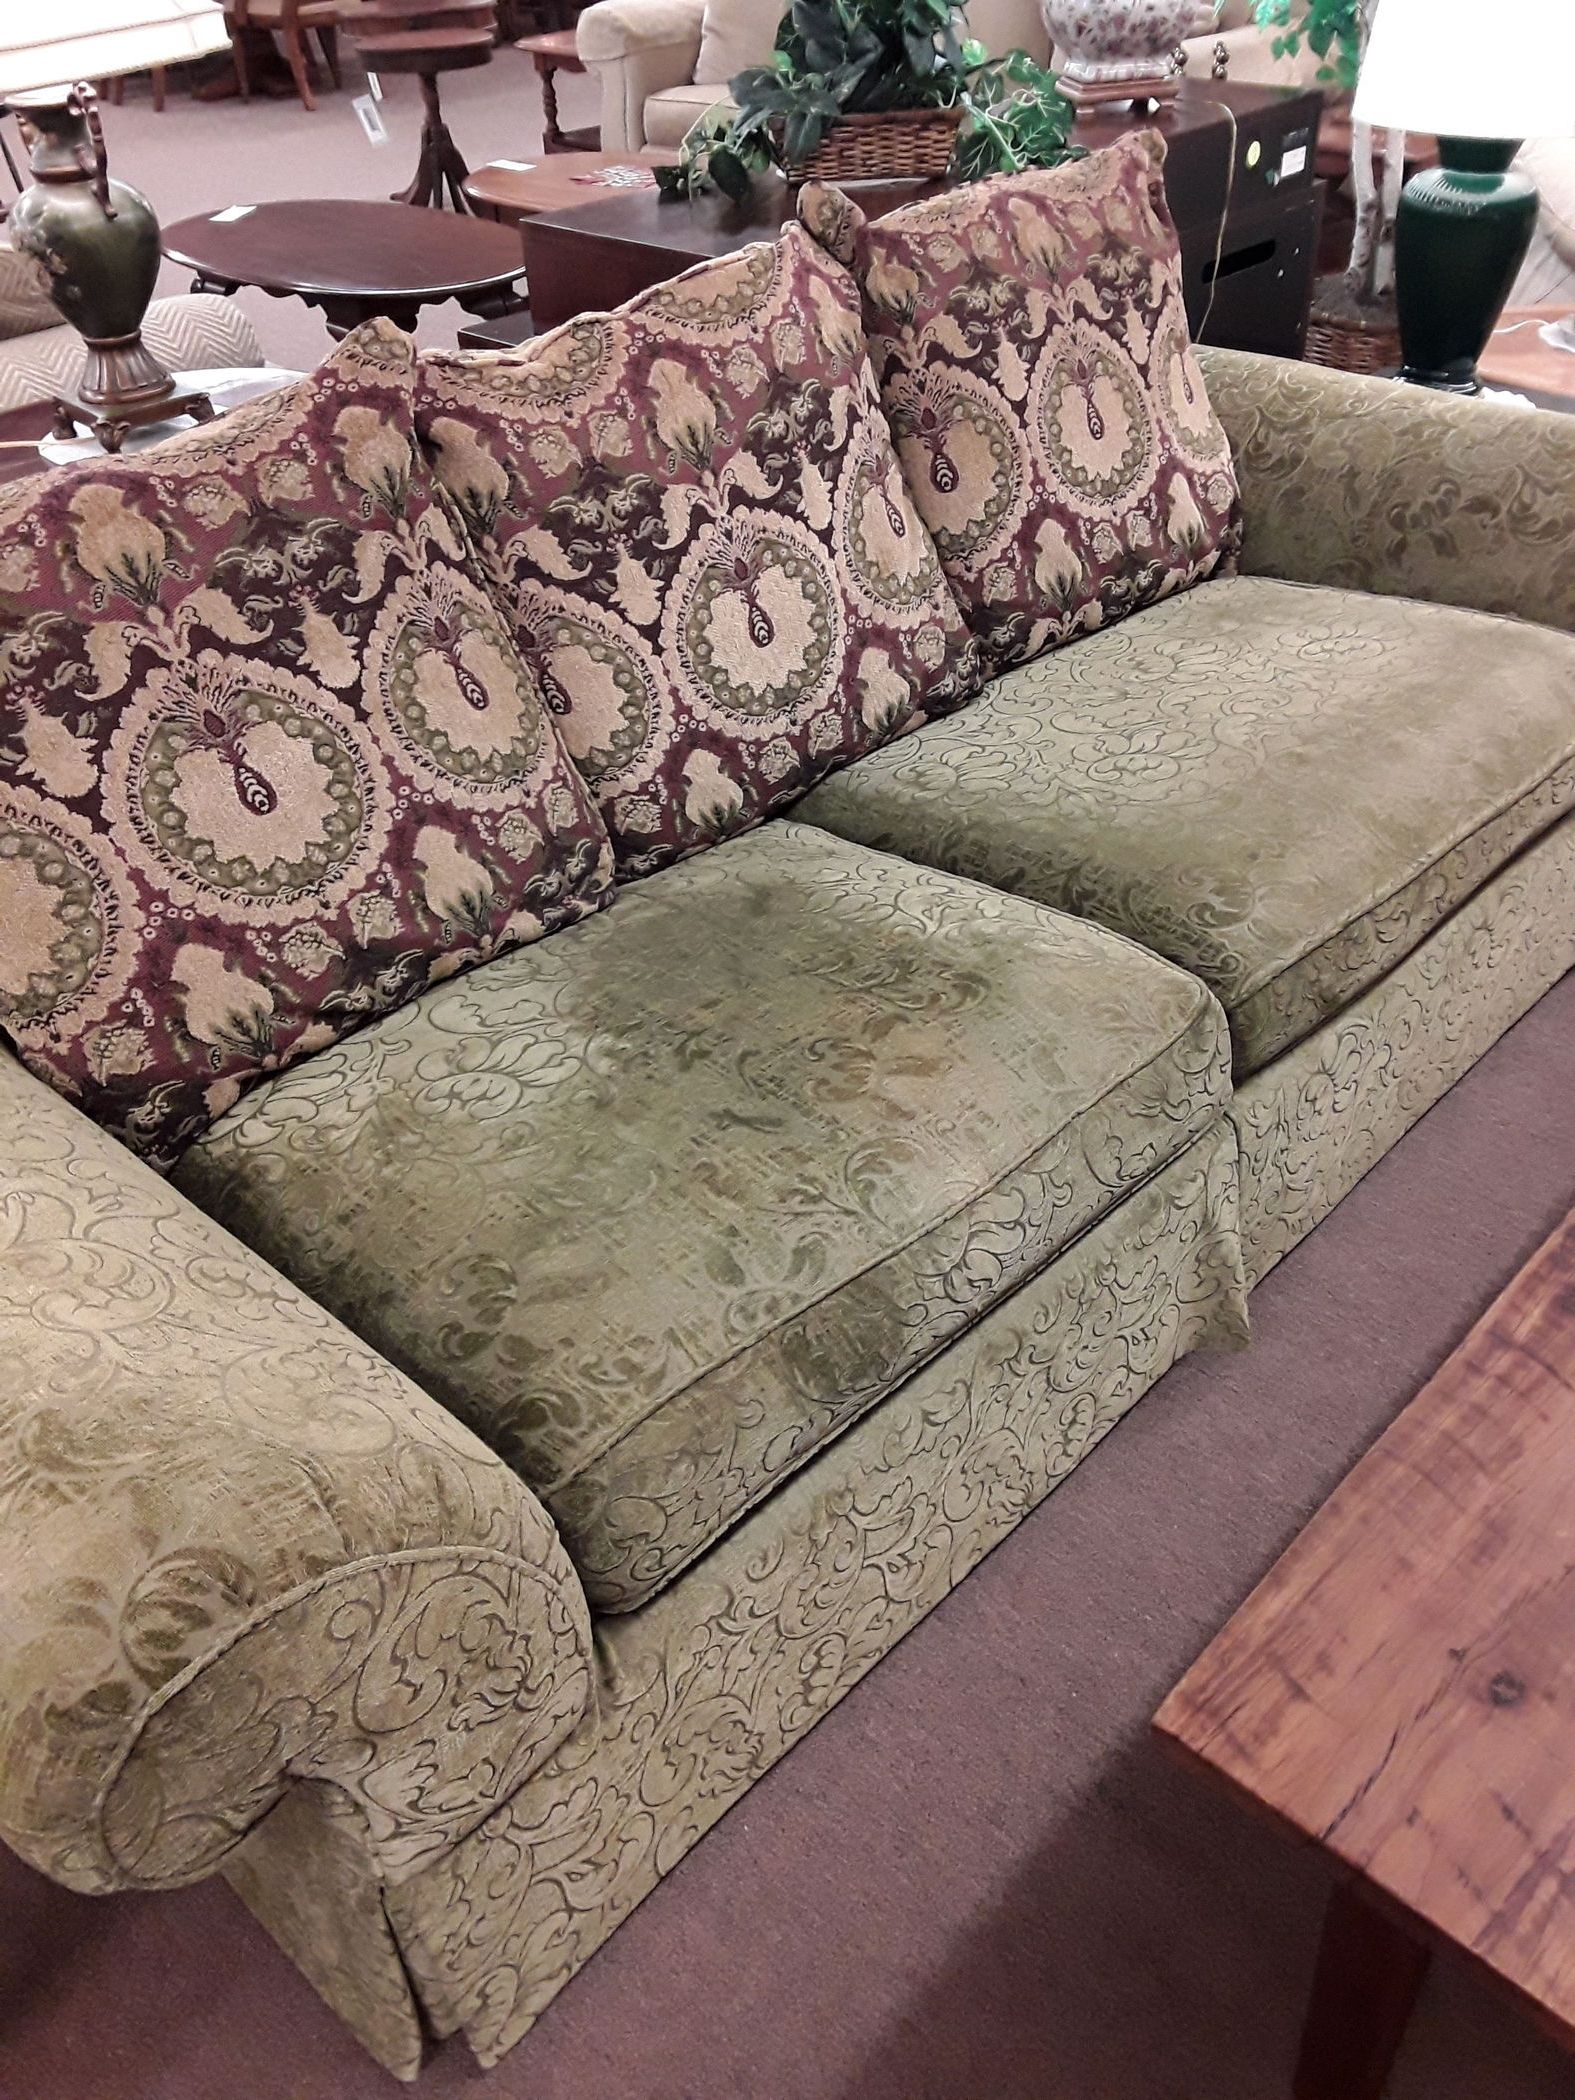 Delmarva Furniture Consignment Intended For Well Known Sofas With Pillowback Wood Bases (View 3 of 15)